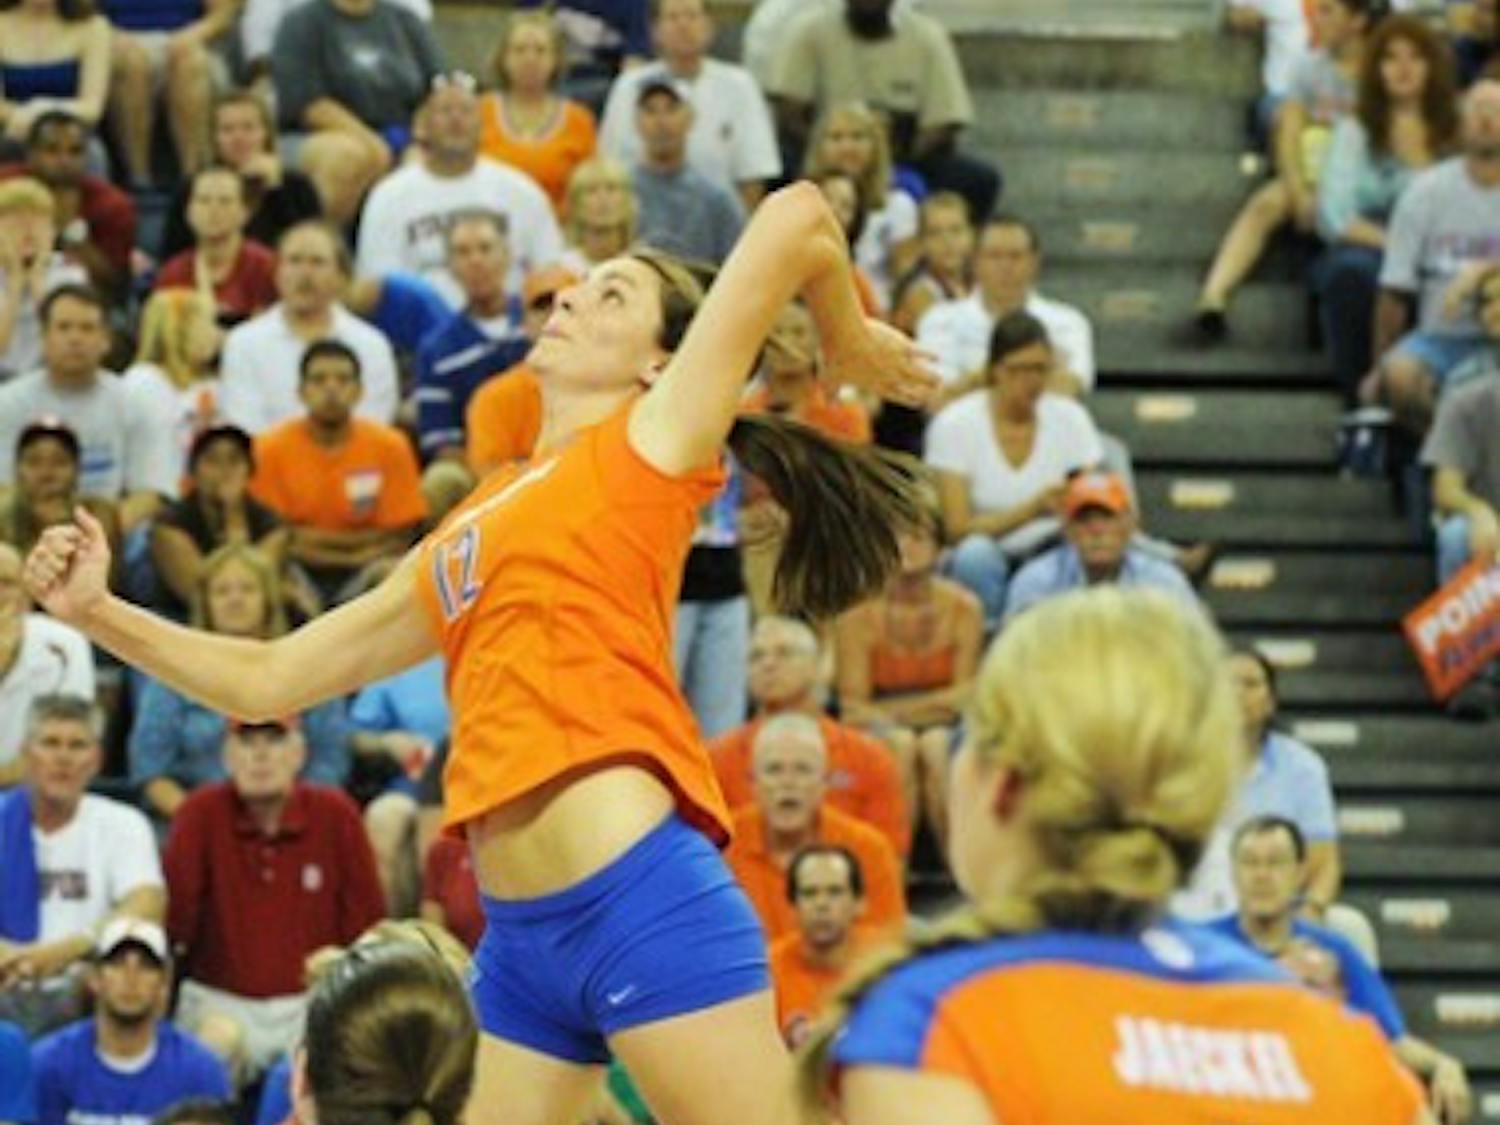 Senior setter Kelly Murphy, a first-team All-American, led UF with 337 kills last season and must keep her teammates focused.